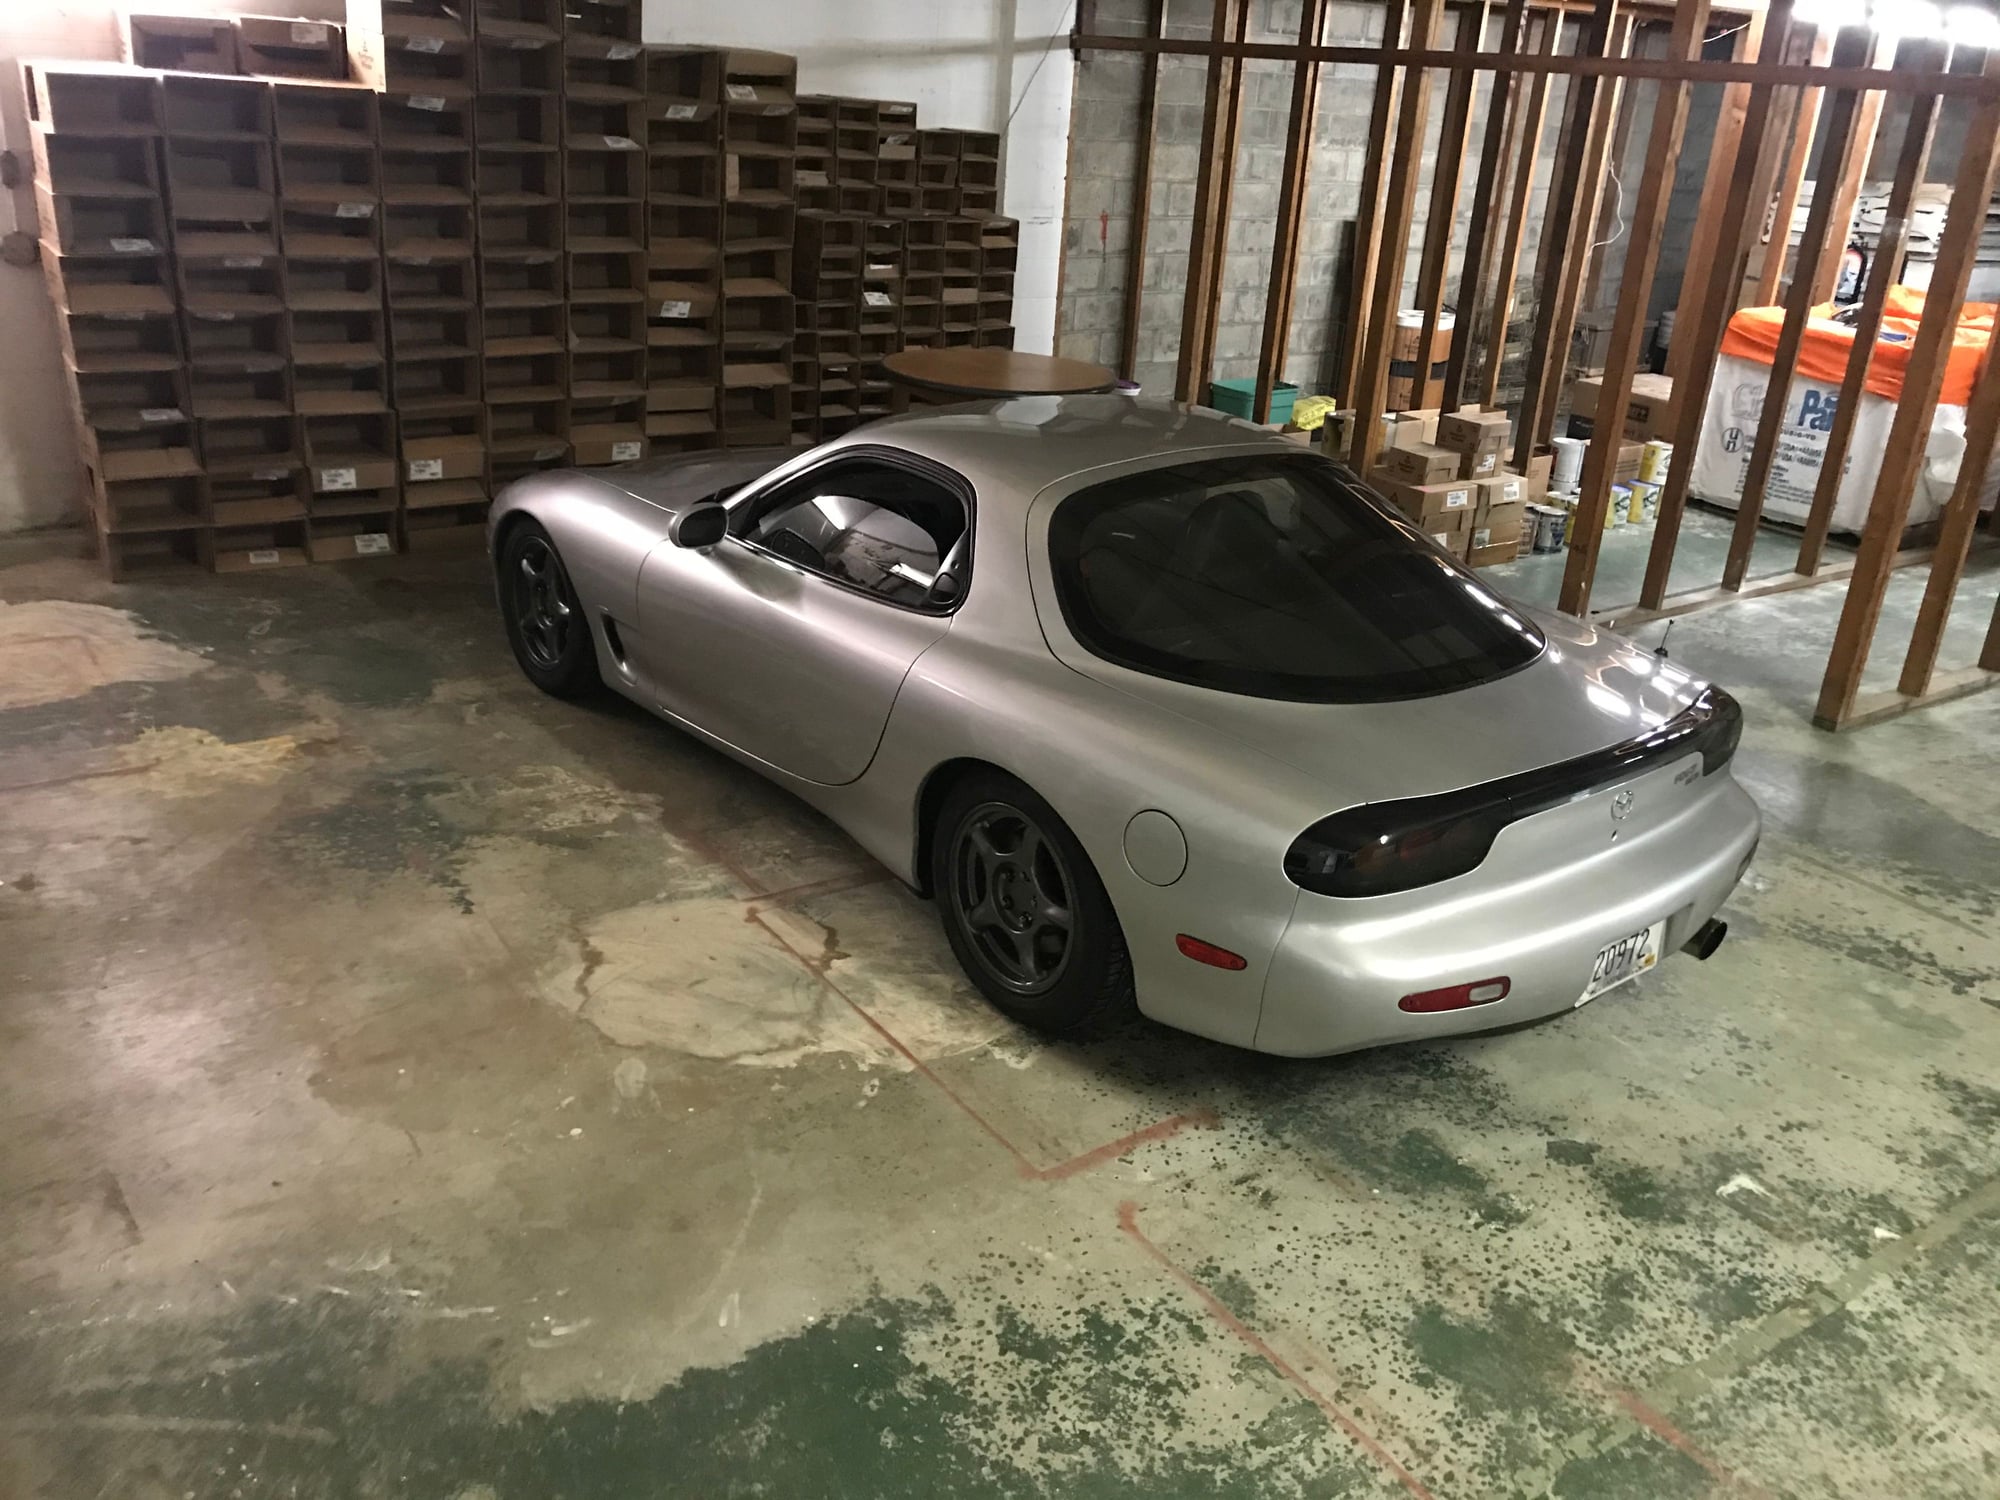 1994 Mazda RX-7 - 94' Silver FD Slick top - Used - VIN JM1FD3337R0302100 - 101,000 Miles - Manual - Coupe - Silver - N. Scituate, RI 02857, United States